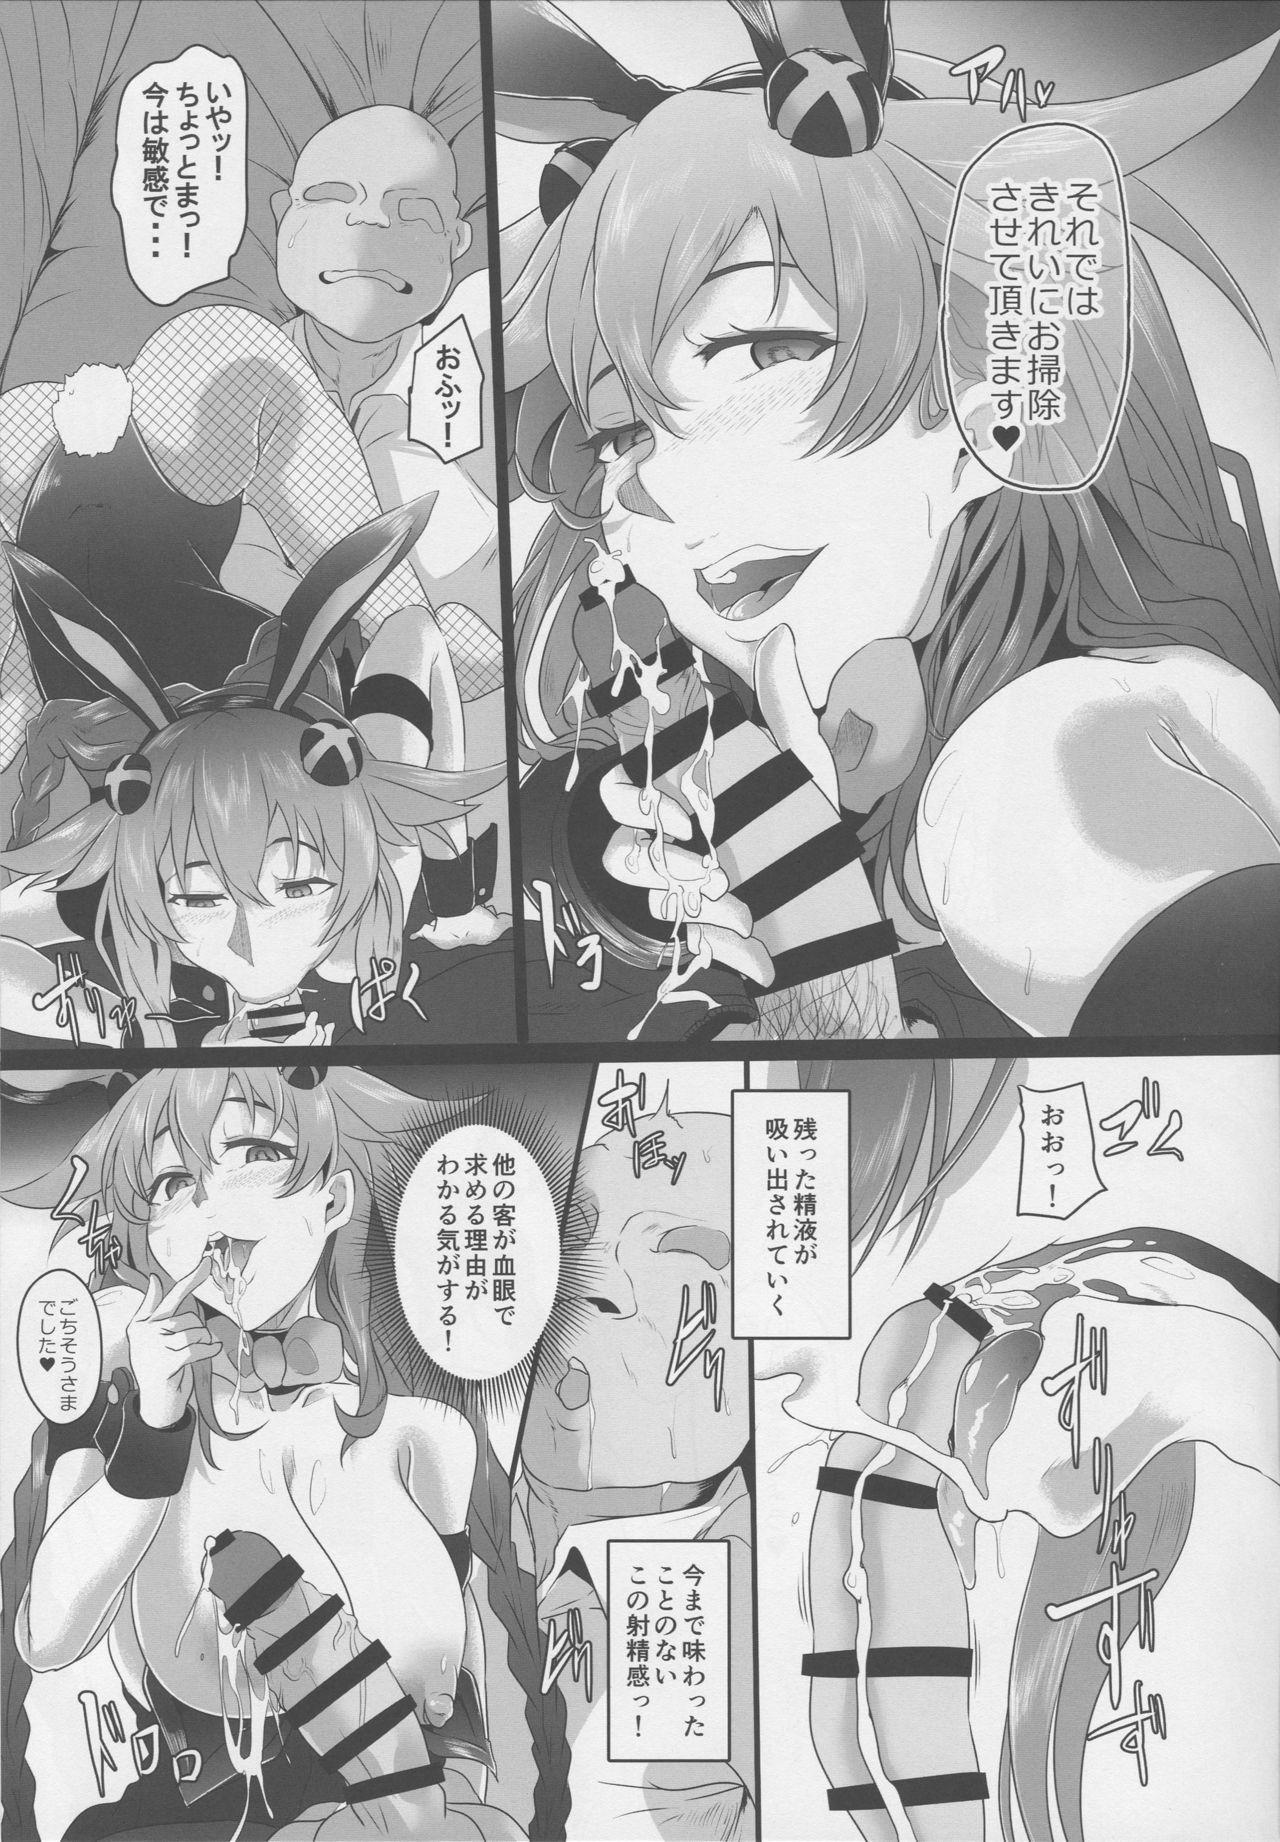 Colombia Fallen Heart Another √Chaos - Hyperdimension neptunia Gayporn - Page 12